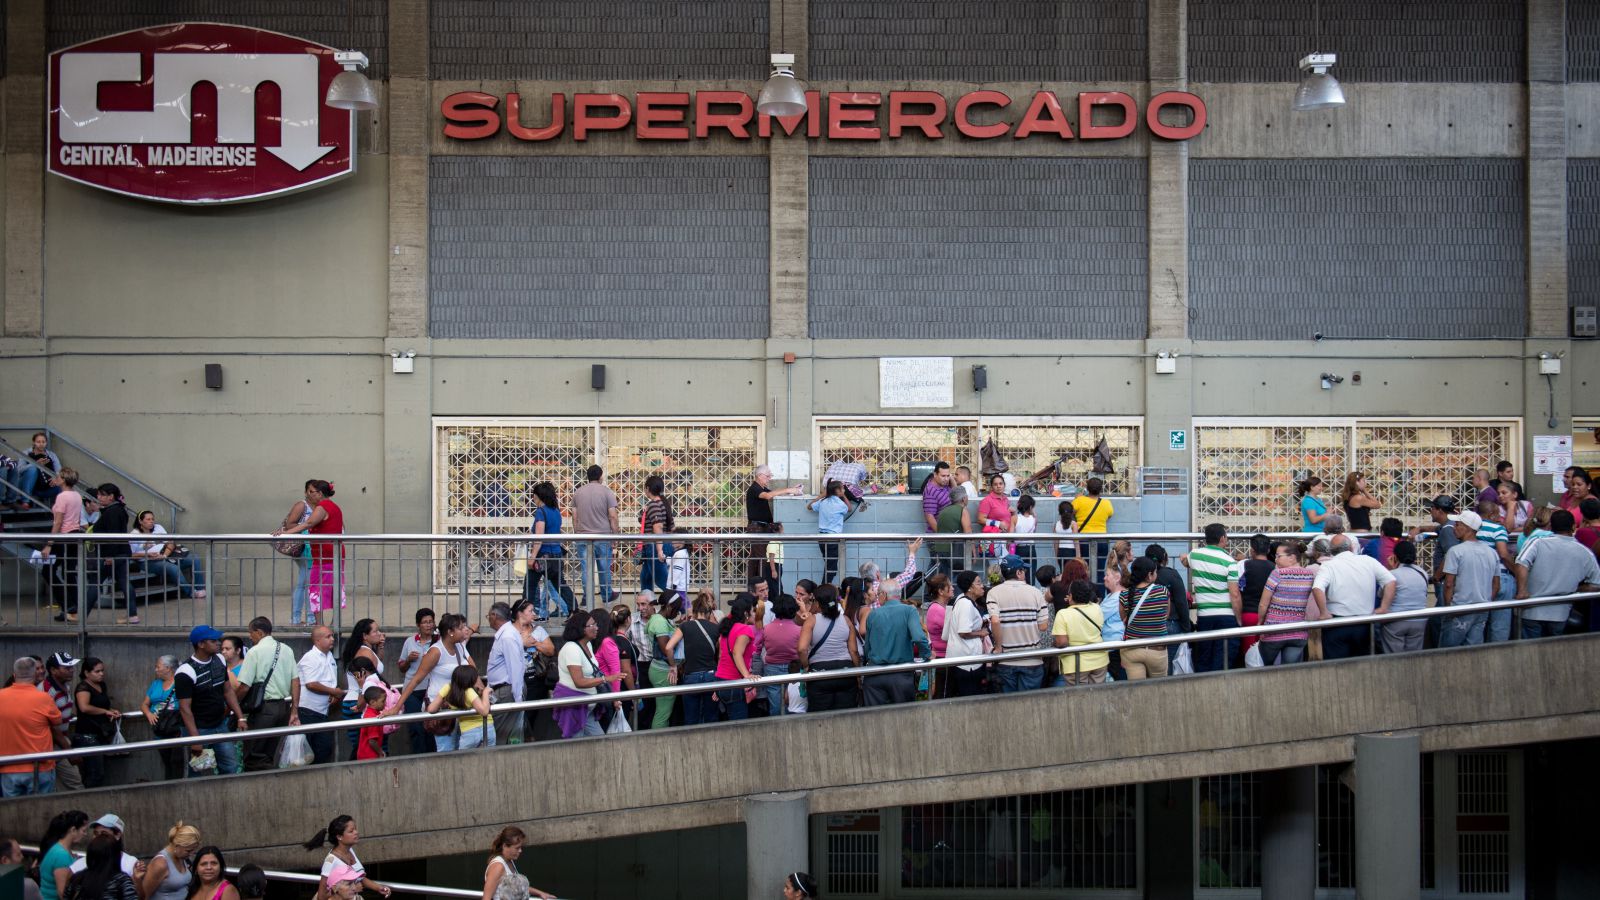 Image: 40% of retail stores in Venezuela go bankrupt as government mandates massive minimum wage hike that no employer can afford